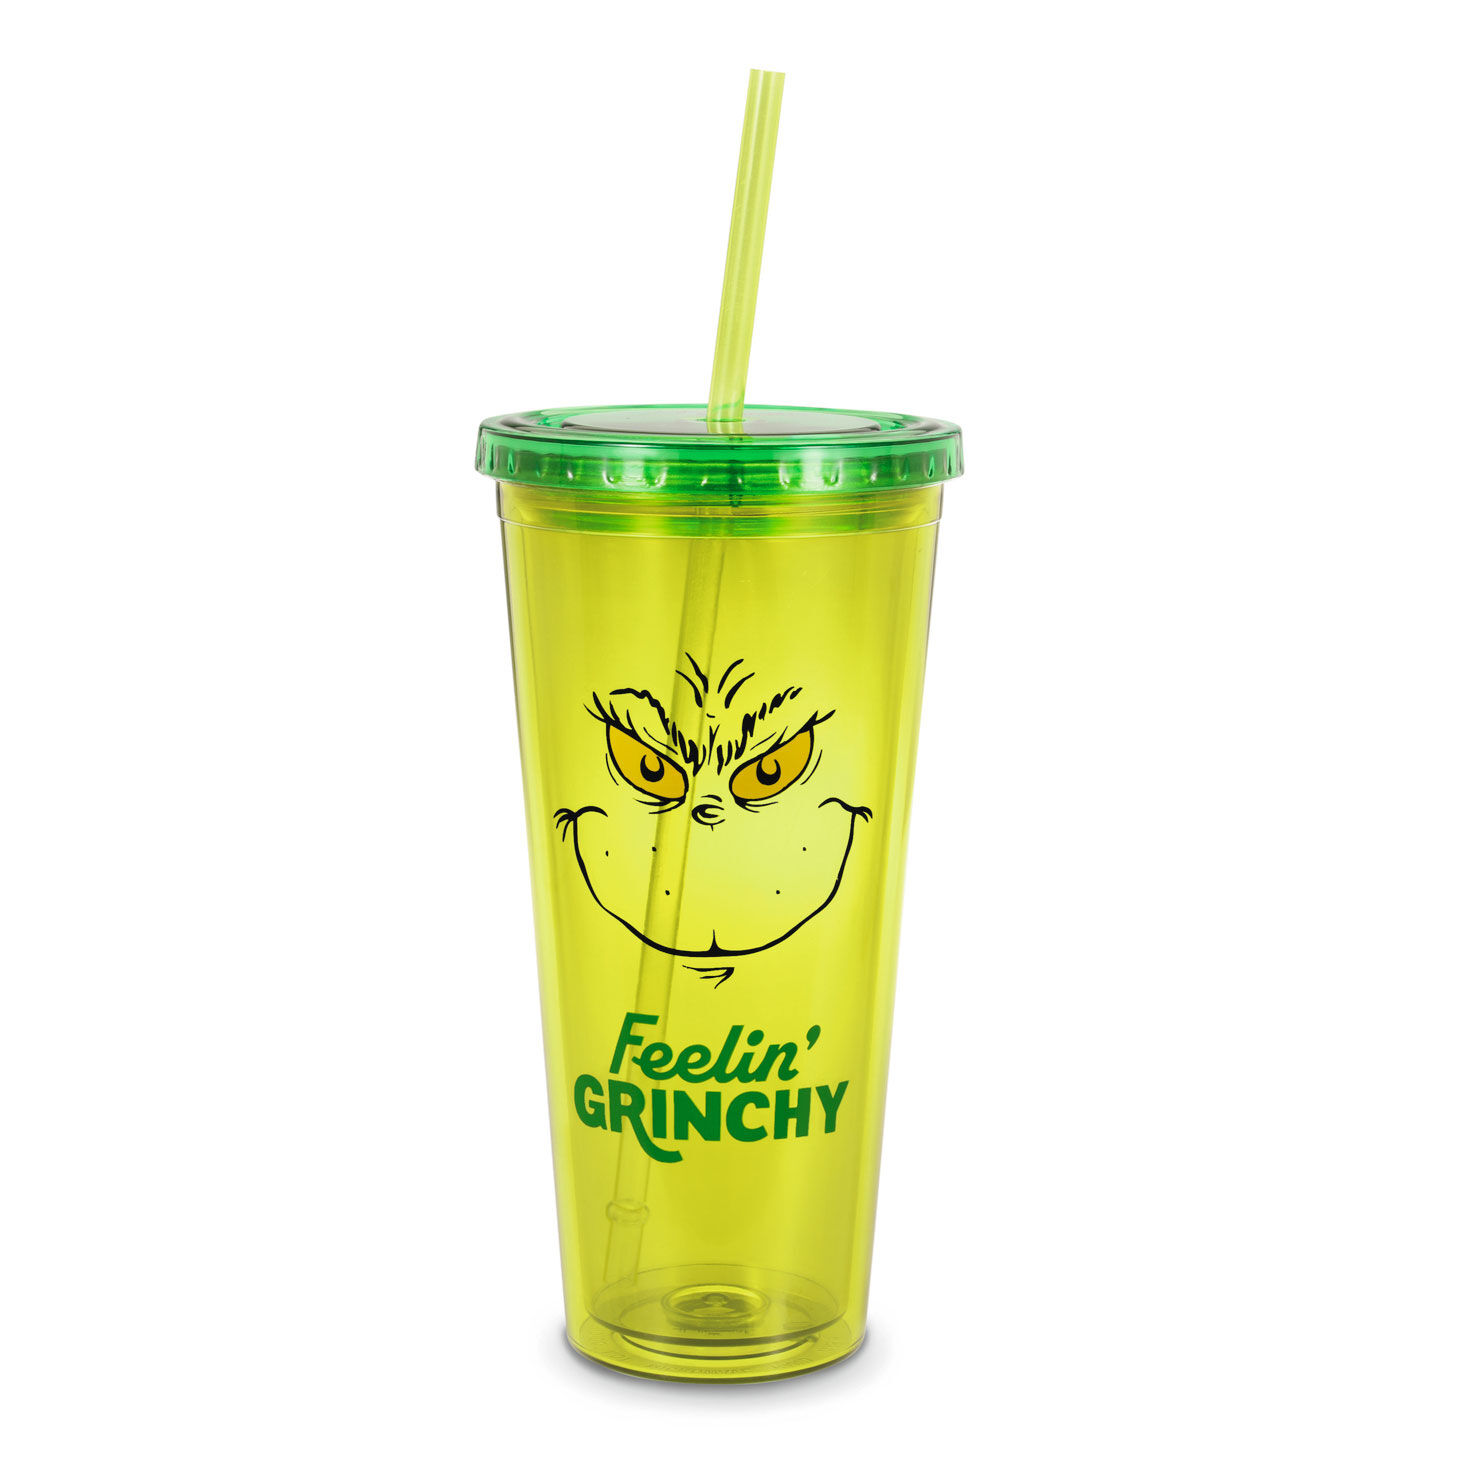 https://www.hallmark.com/dw/image/v2/AALB_PRD/on/demandware.static/-/Sites-hallmark-master/default/dw9eb6731e/images/finished-goods/products/1XKT2485/Feelin-Grinchy-Insulated-Cup-With-Lid-and-Straw_1XKT2485_01.jpg?sfrm=jpg